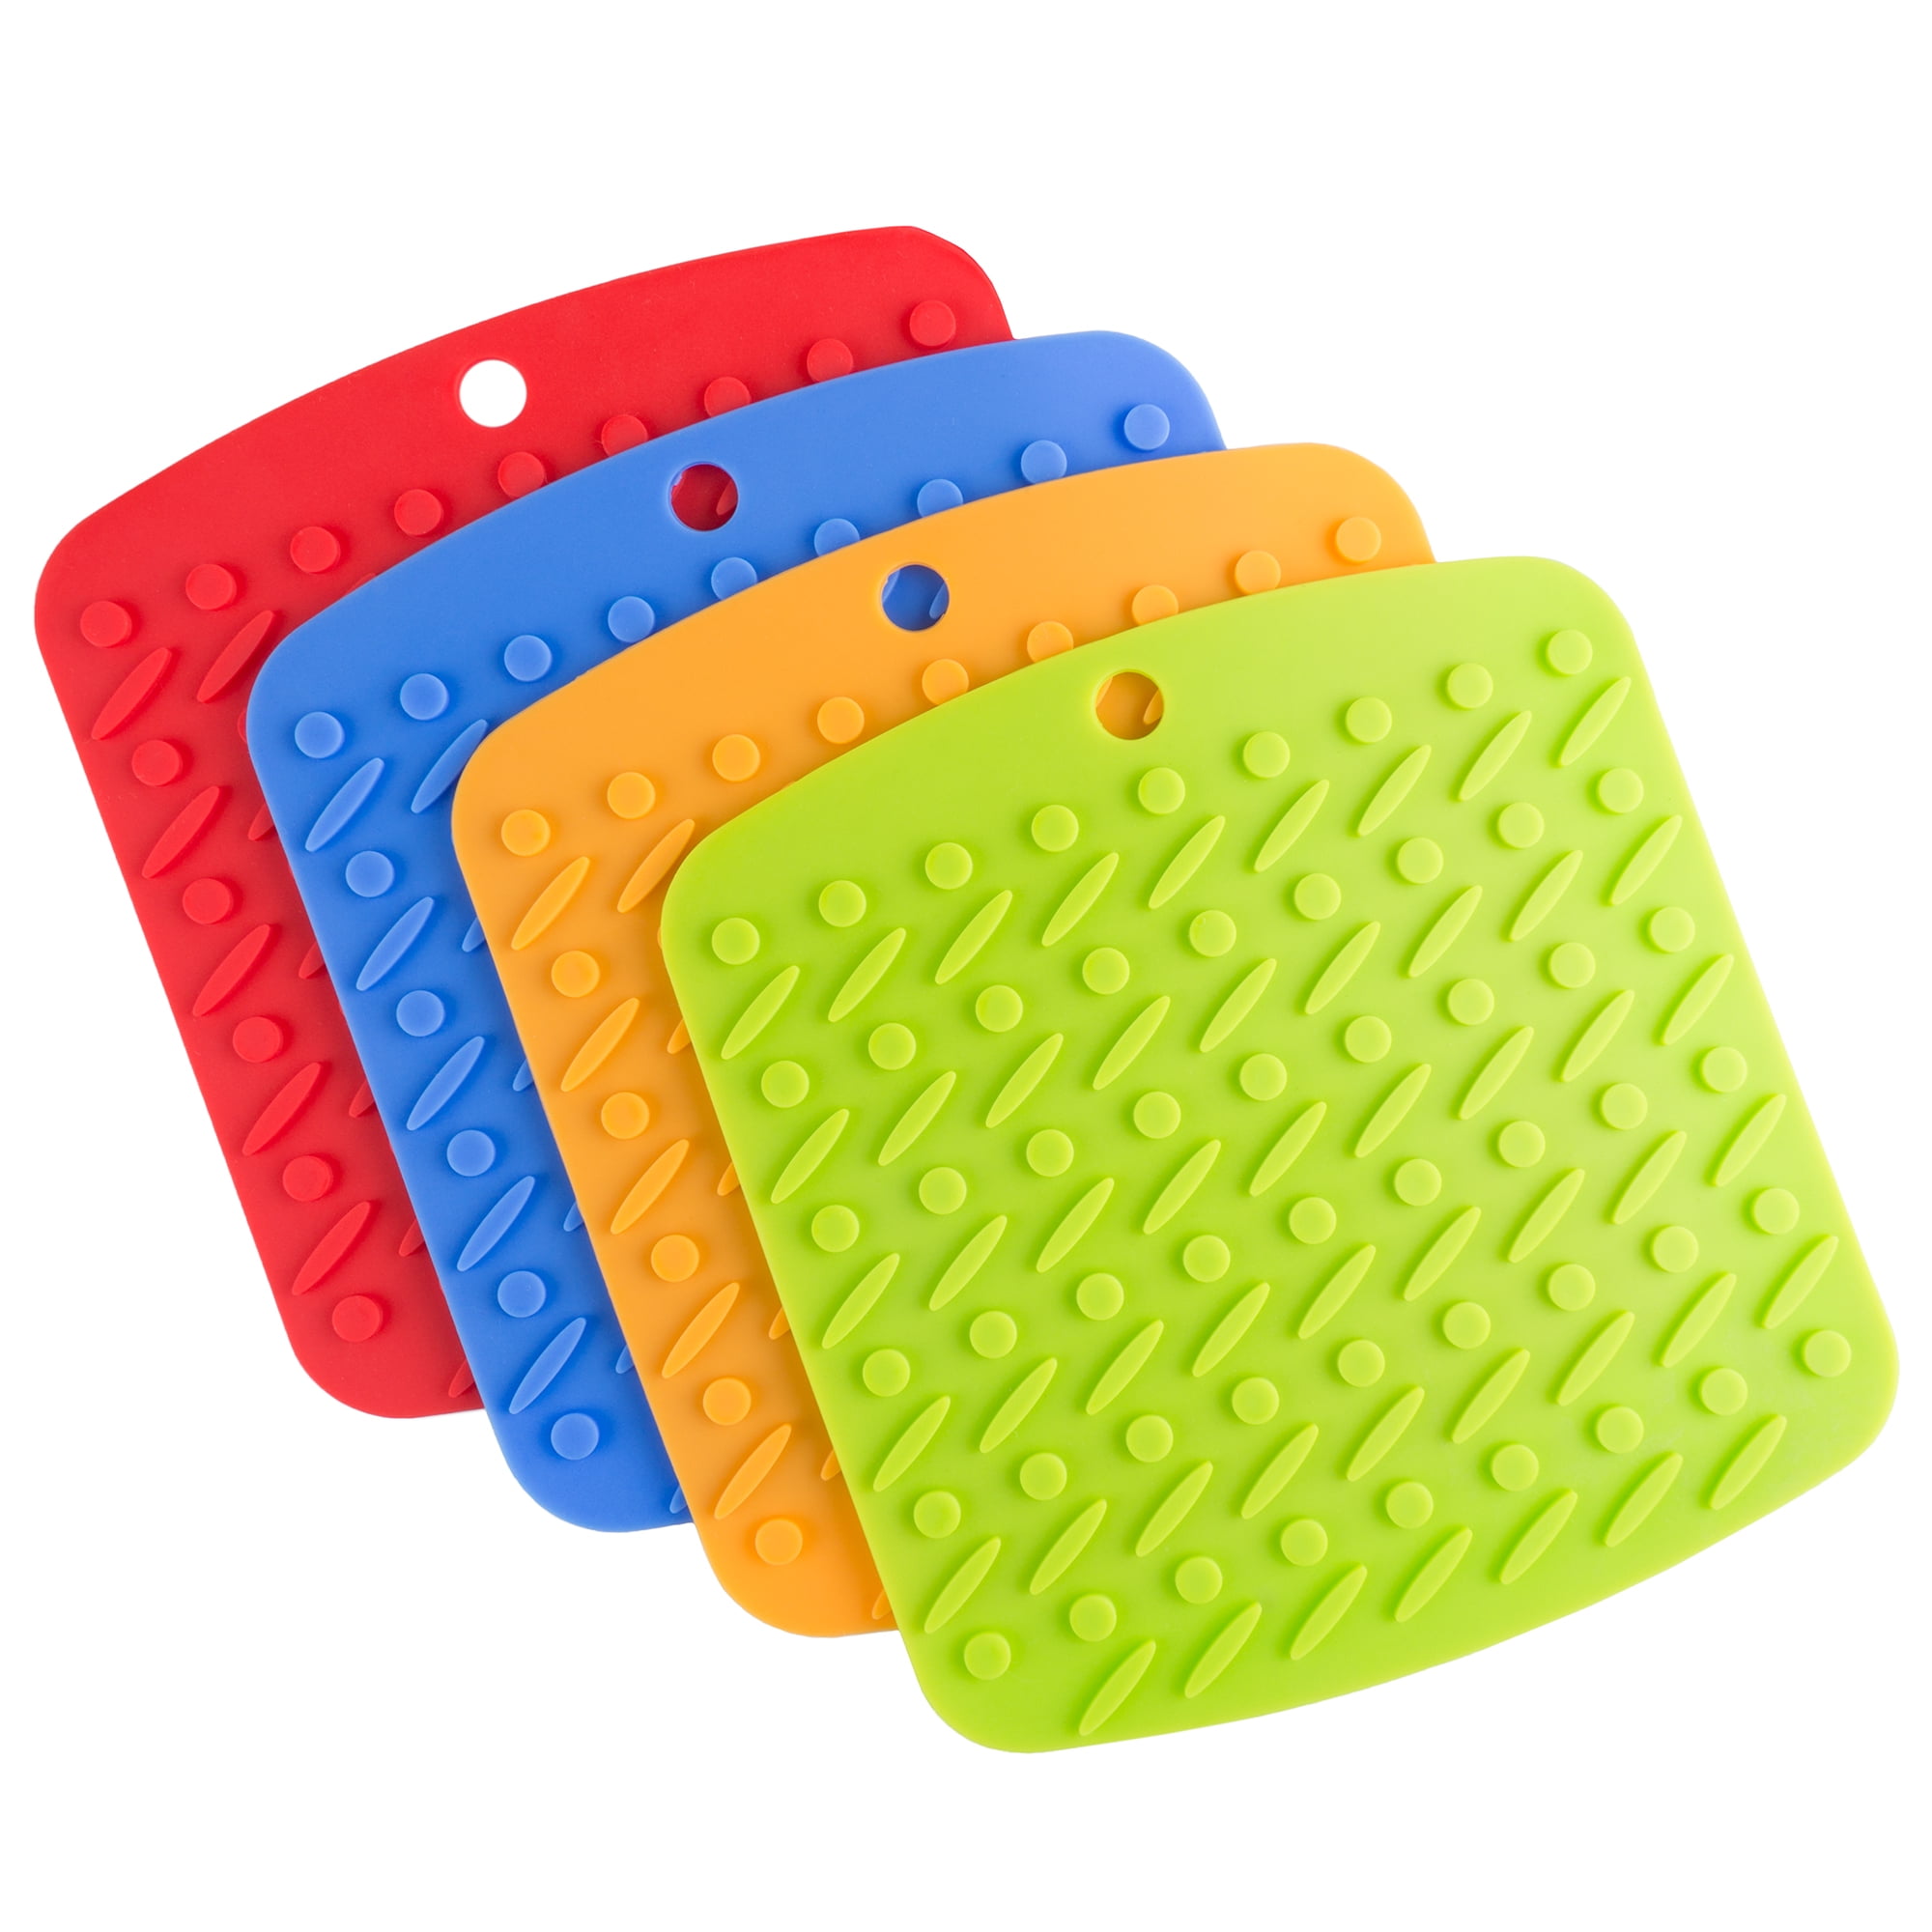 Mastrad Silicone Pot Holder High Heat Resistant Trivet is Dishwasher Safe and Featured Double-Sided Non-Slip Ridges For Ultimate Gripability A83401 Charcoal 